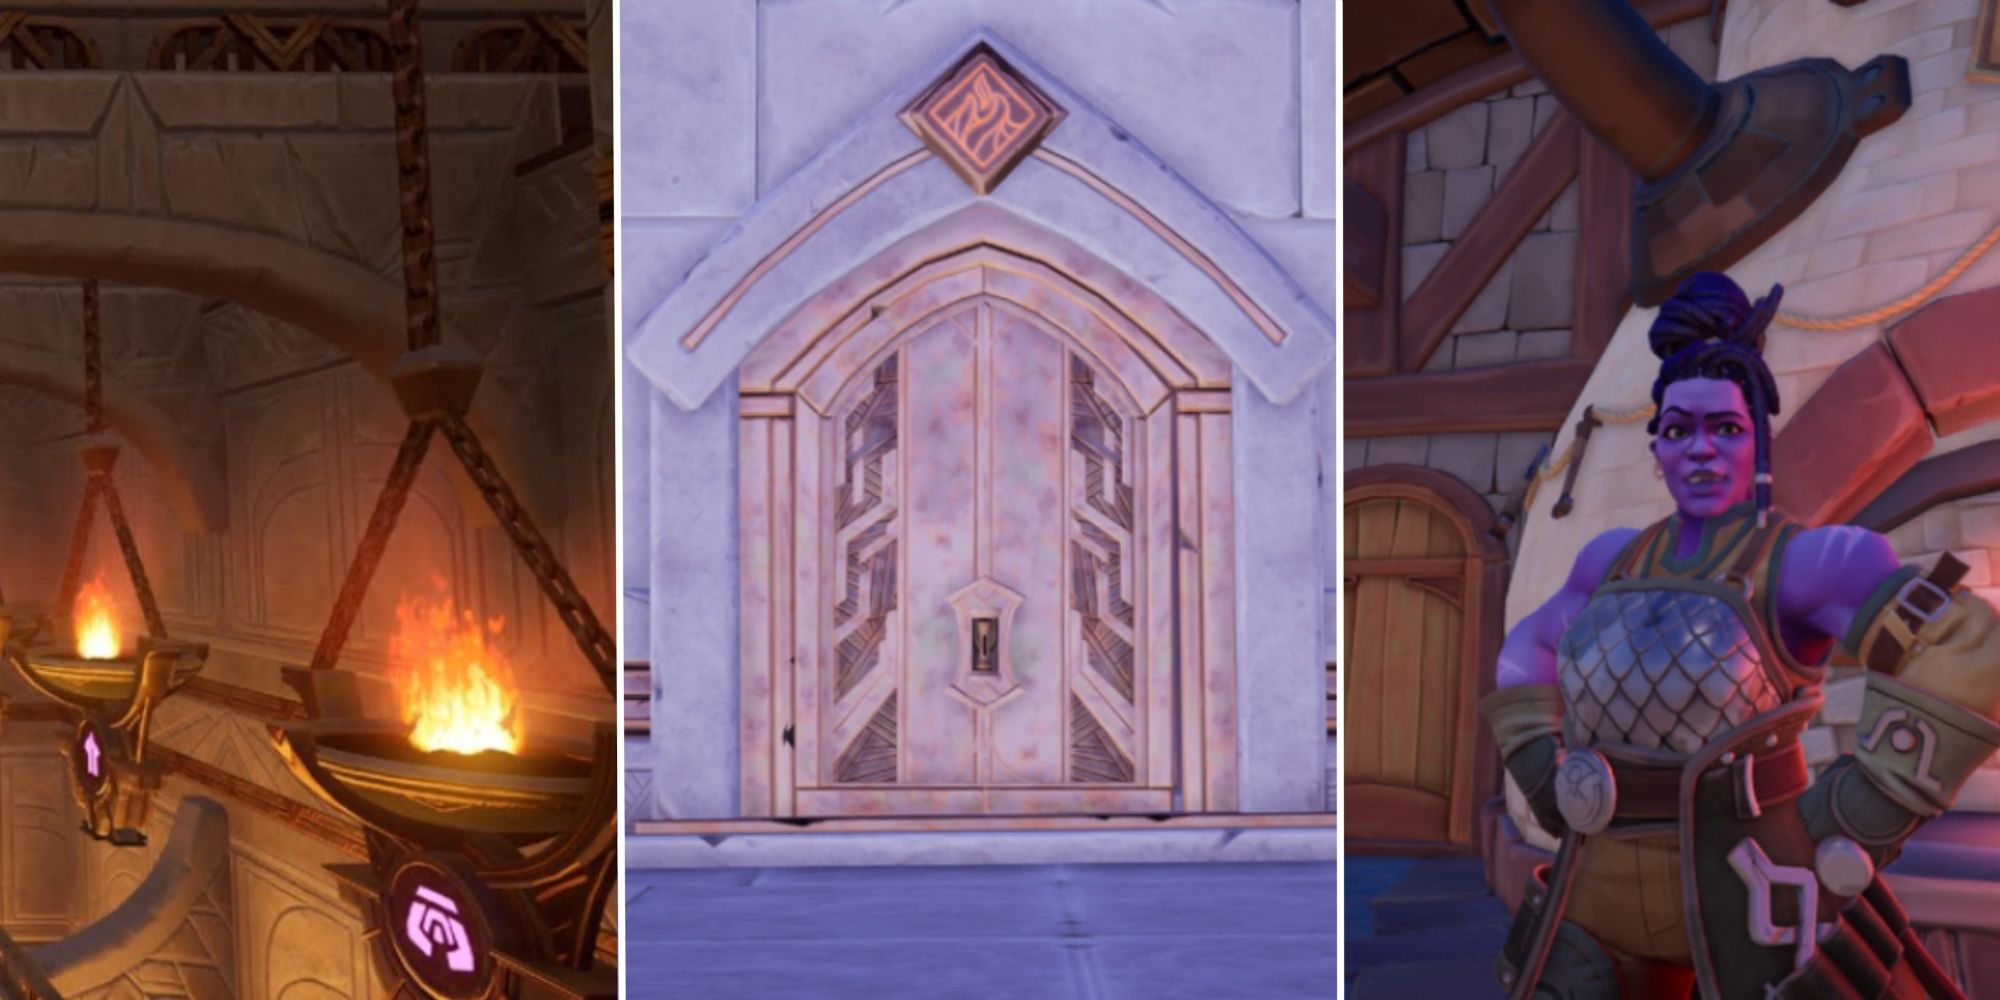 Palia Fire Temple doorway in center panel, Sifuu in right panel, and hanging lit braziers with glowing runes in left panel.